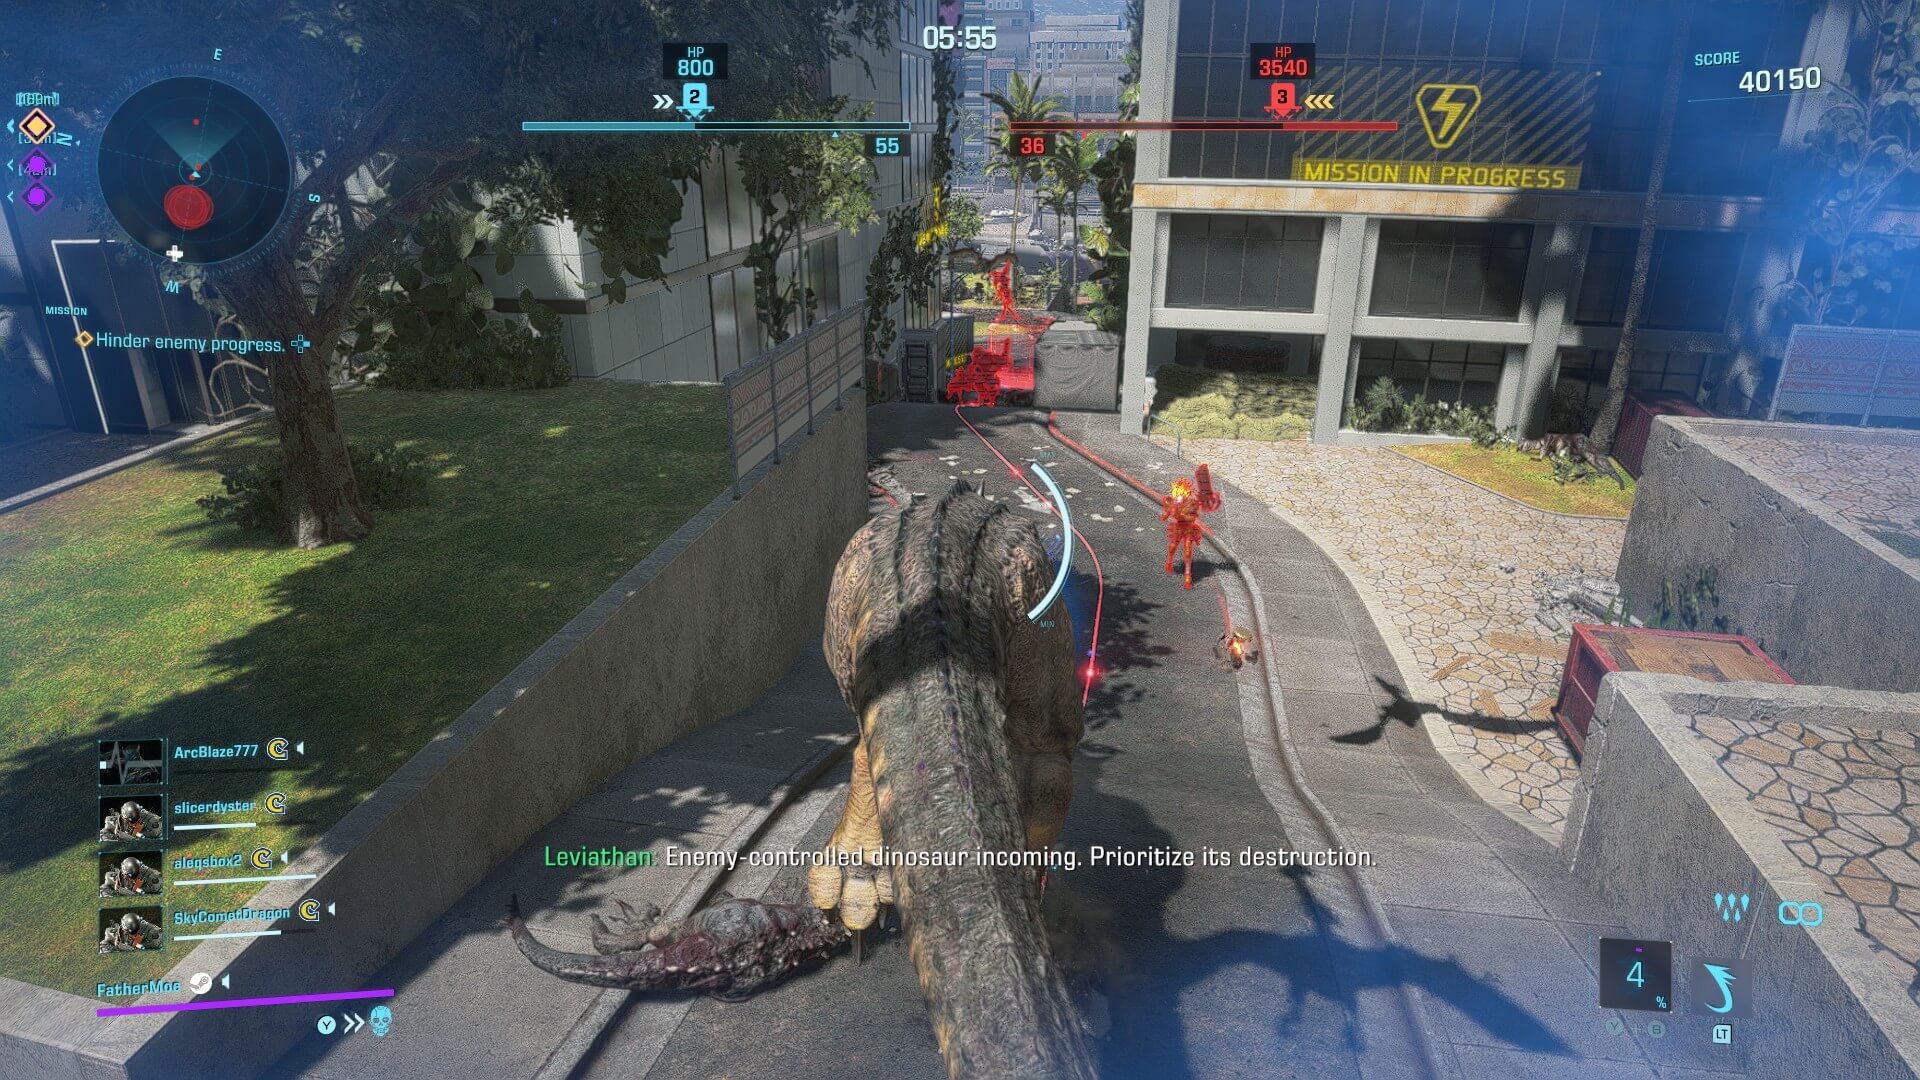 I'm currently controlling a dinosaur and about to cause chaos for the other team. The small curved bar next to my character is the health bar of the dinosaur.